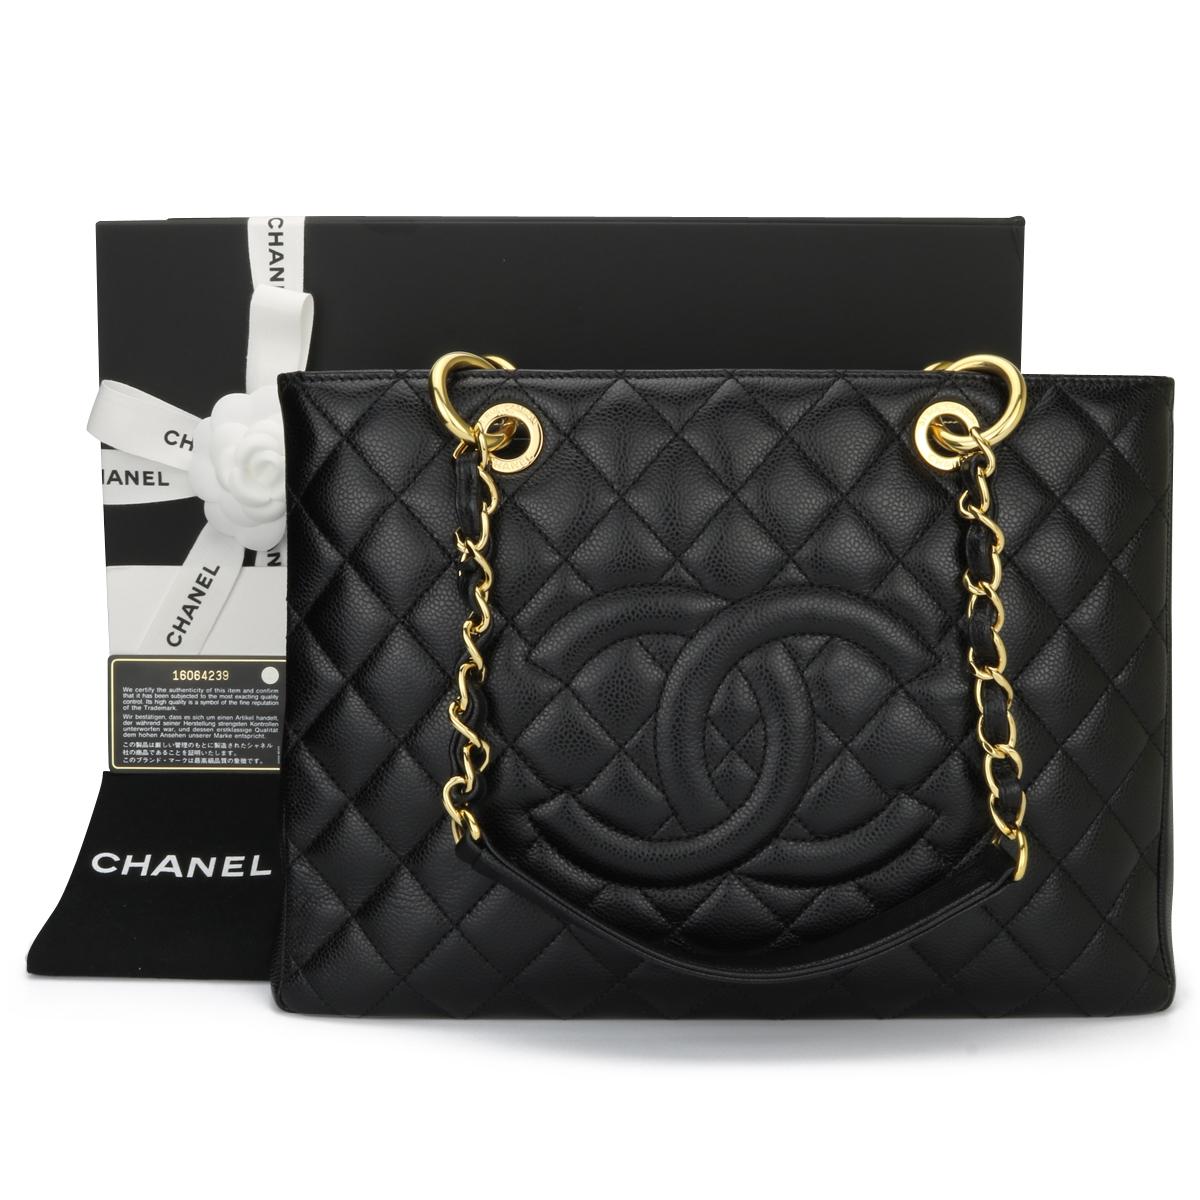 CHANEL Grand Shopping Tote (GST) Bag Black Caviar with Gold Hardware 2012 13